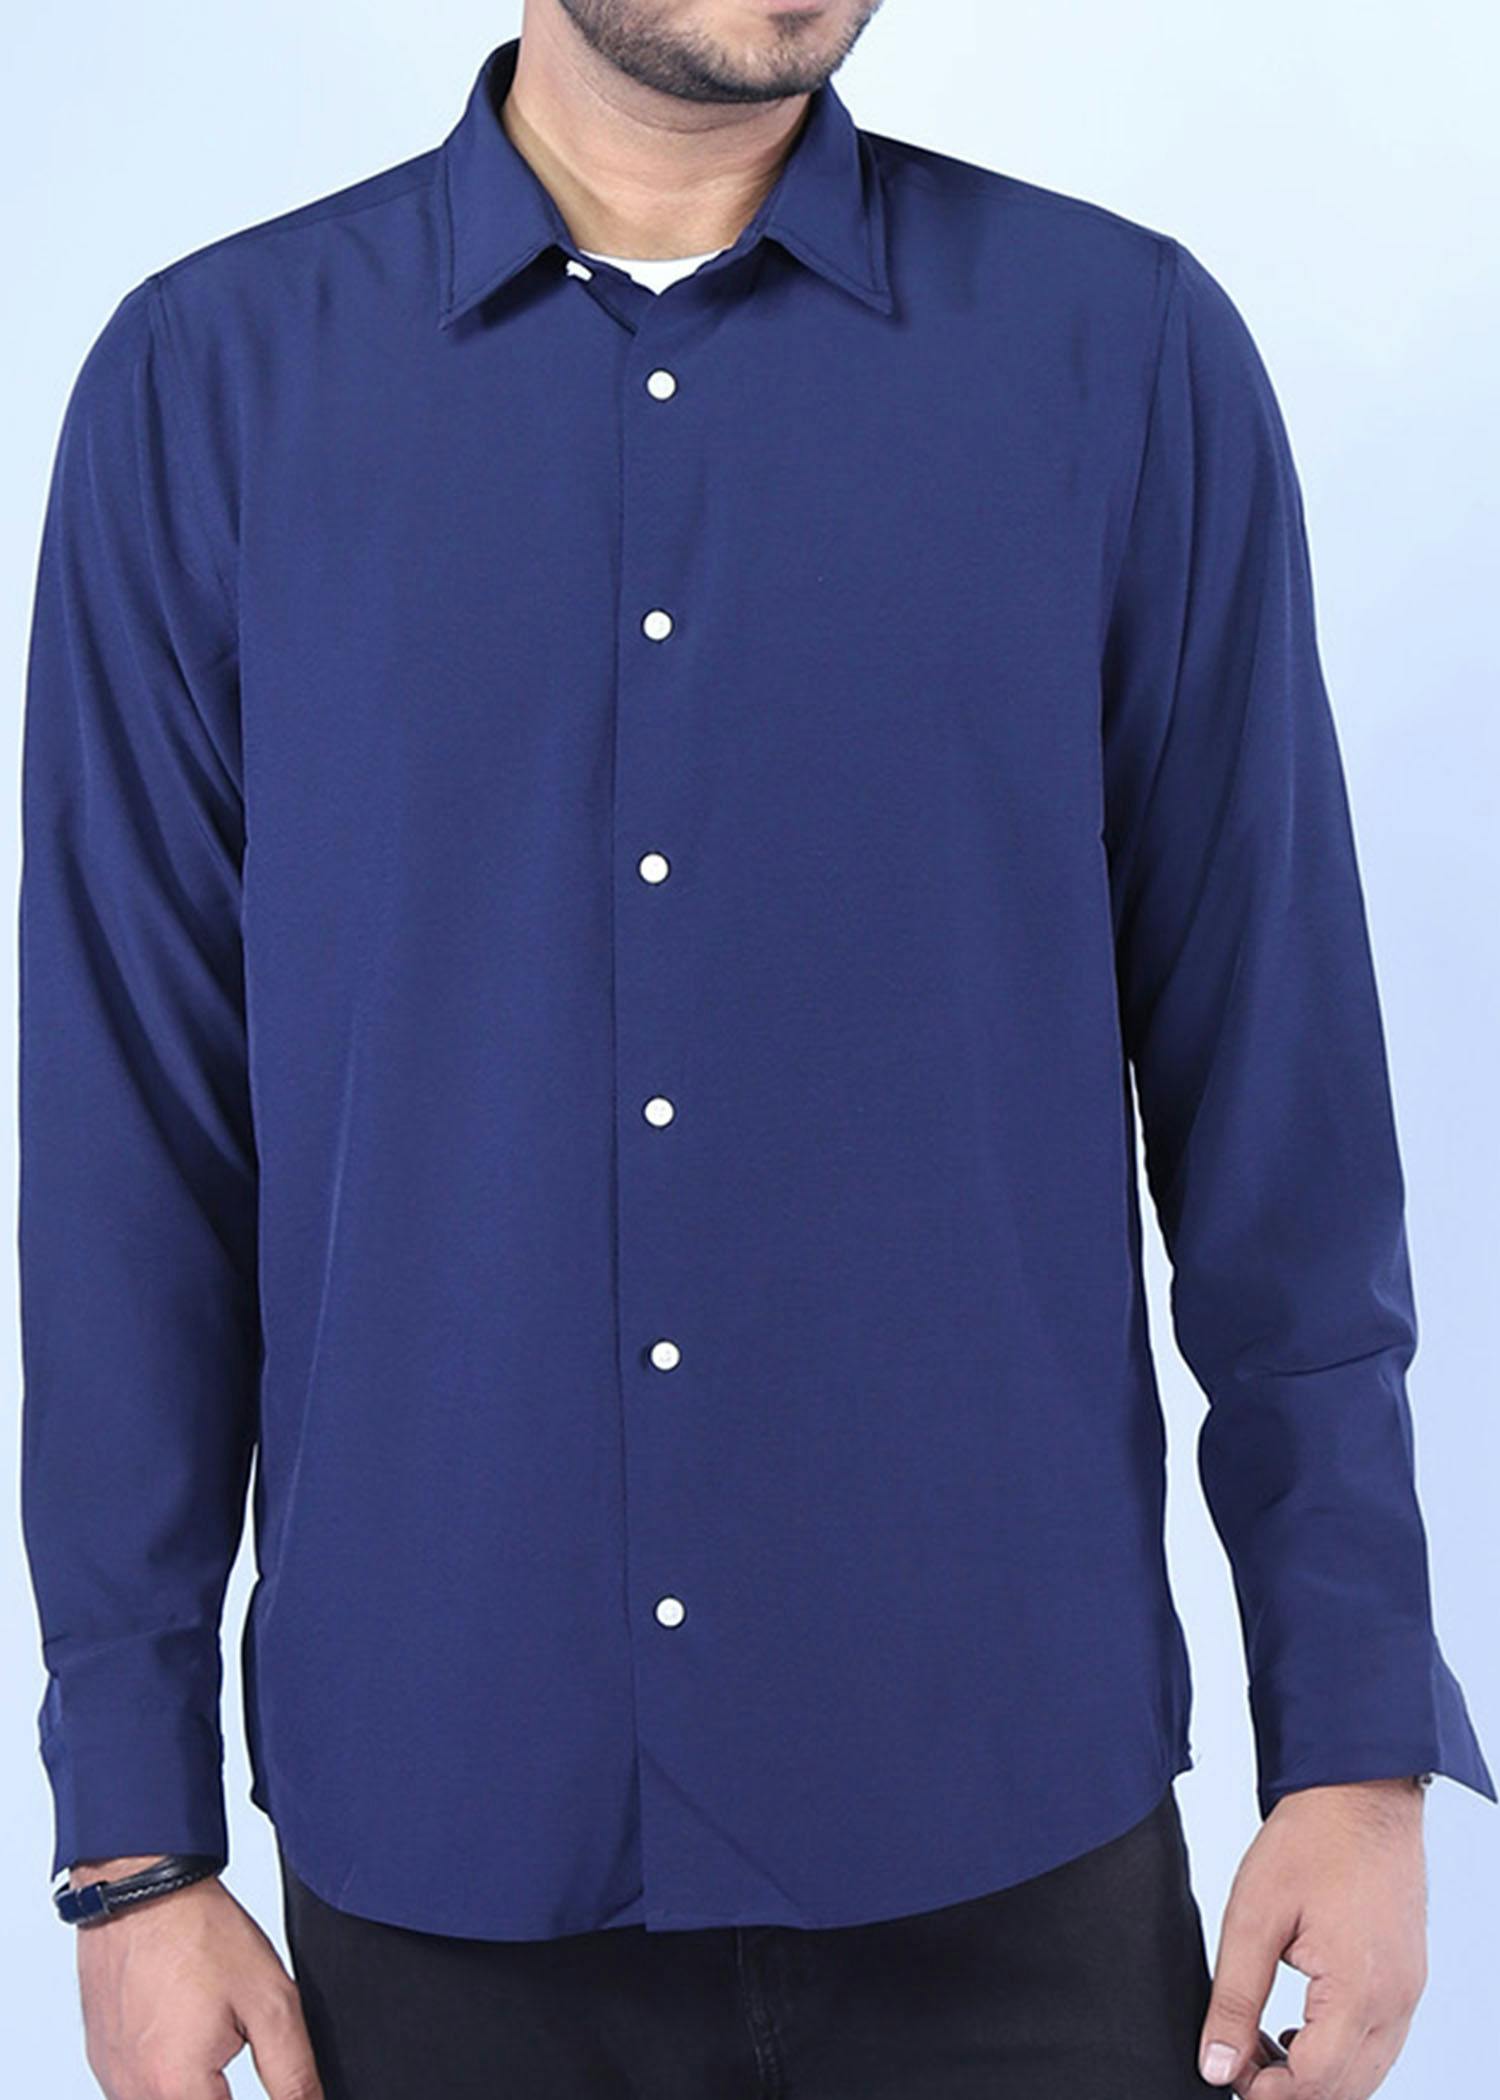 istanbul xxiv fs shirt navy color headcropped